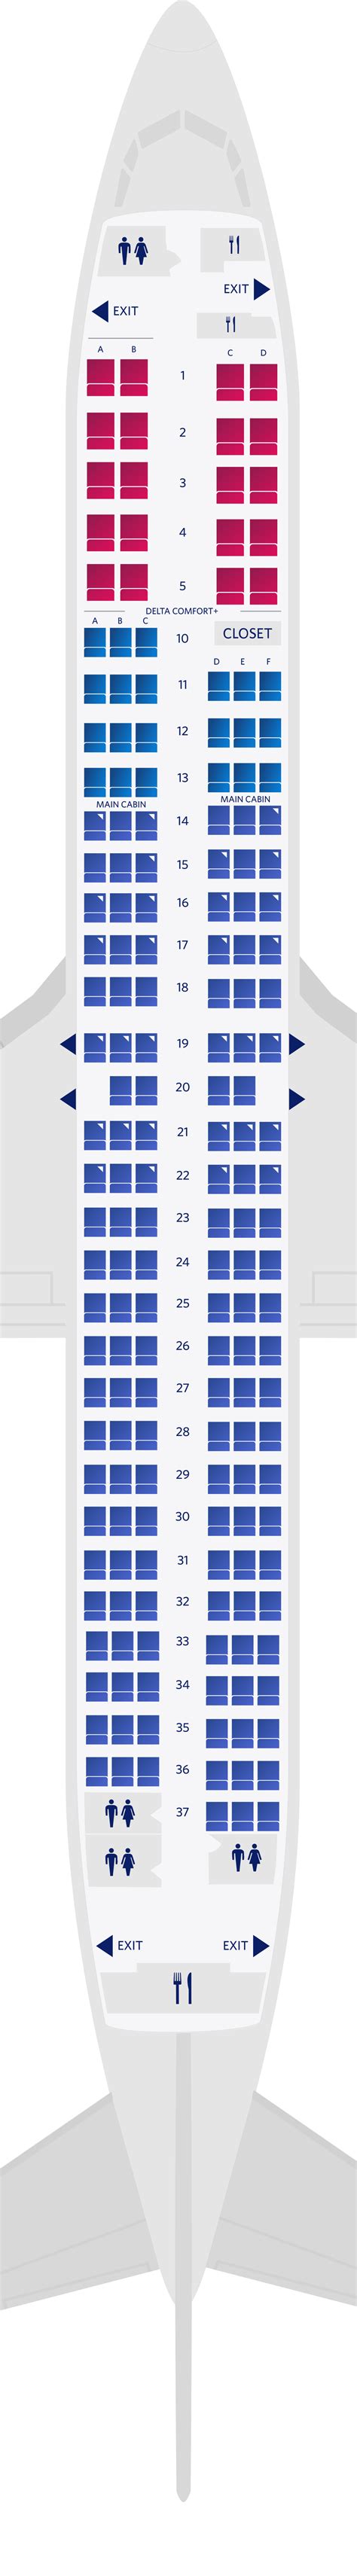 United Airlines 737 900 Seat Map